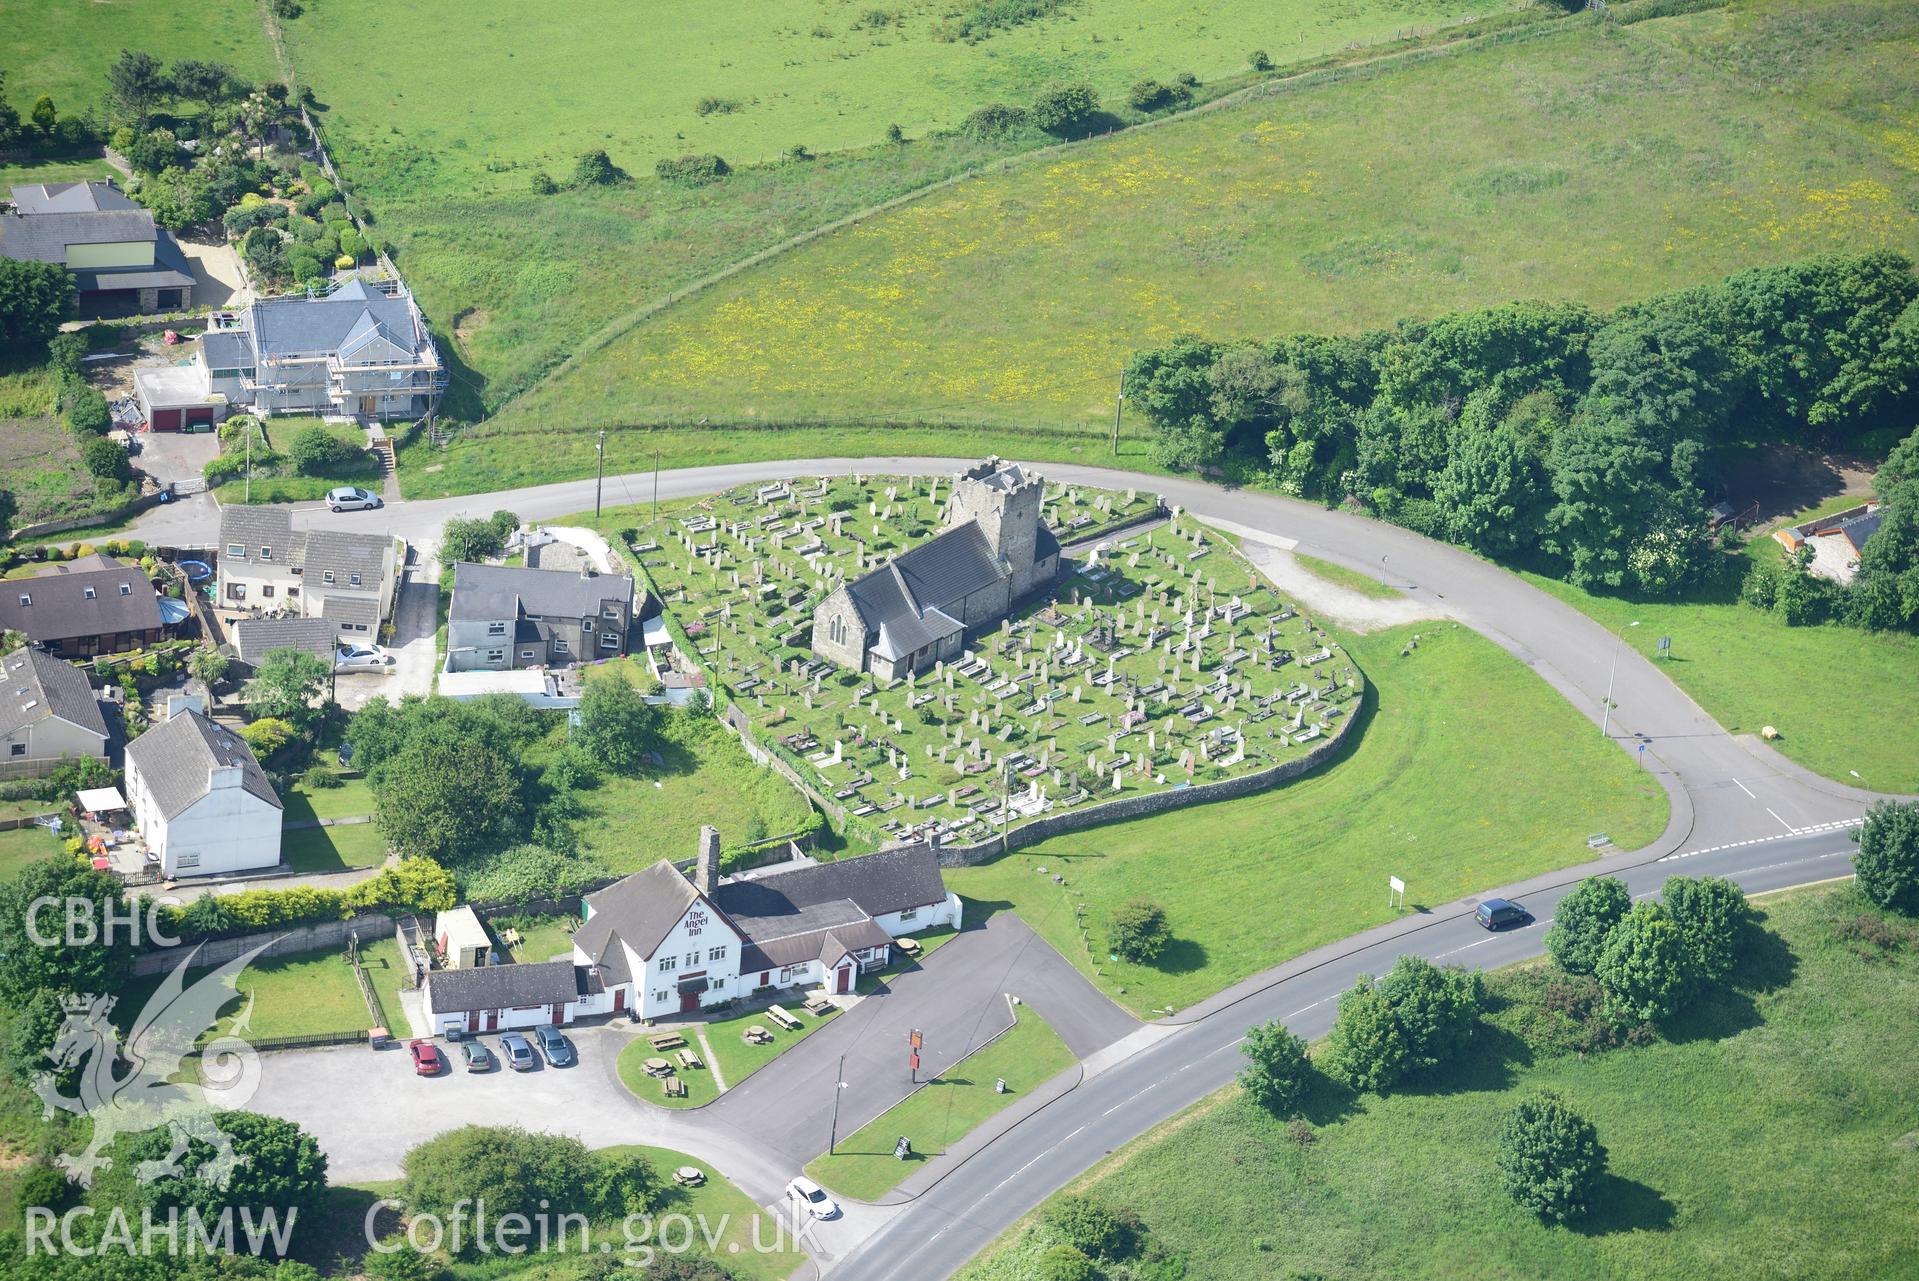 St. Mary Magdalen's Church and The Angel Inn, Mawdlam. Oblique aerial photograph taken during the Royal Commission's programme of archaeological aerial reconnaissance by Toby Driver on 19th June 2015.